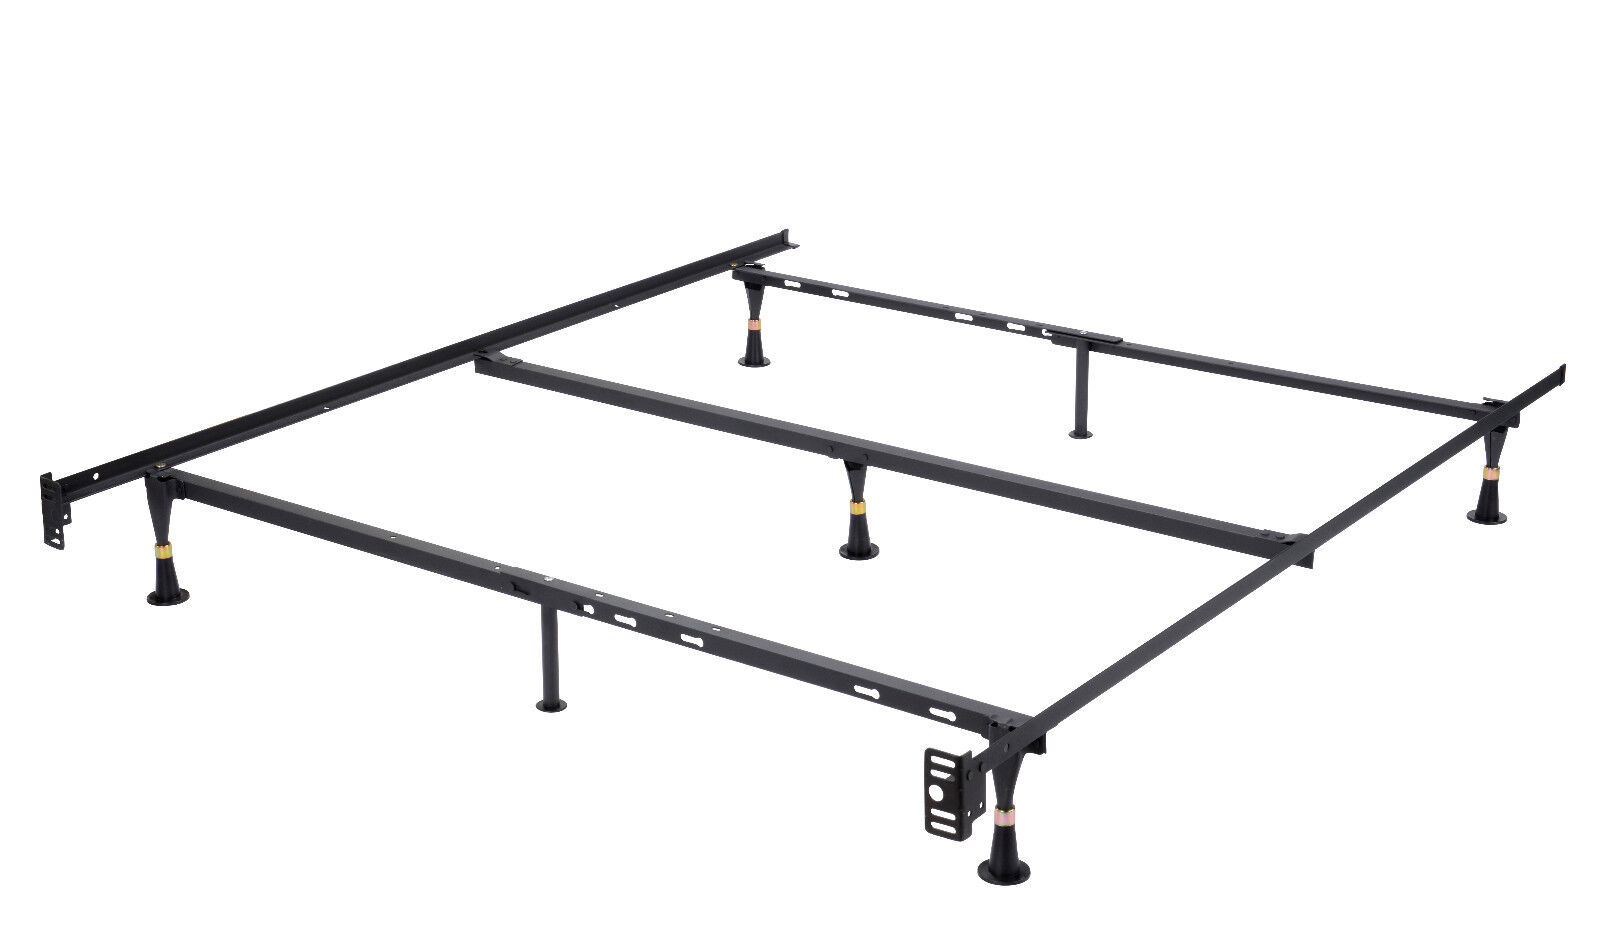 Details about 7Leg Heavy Duty Metal Queen Size Bed Frame with Center 